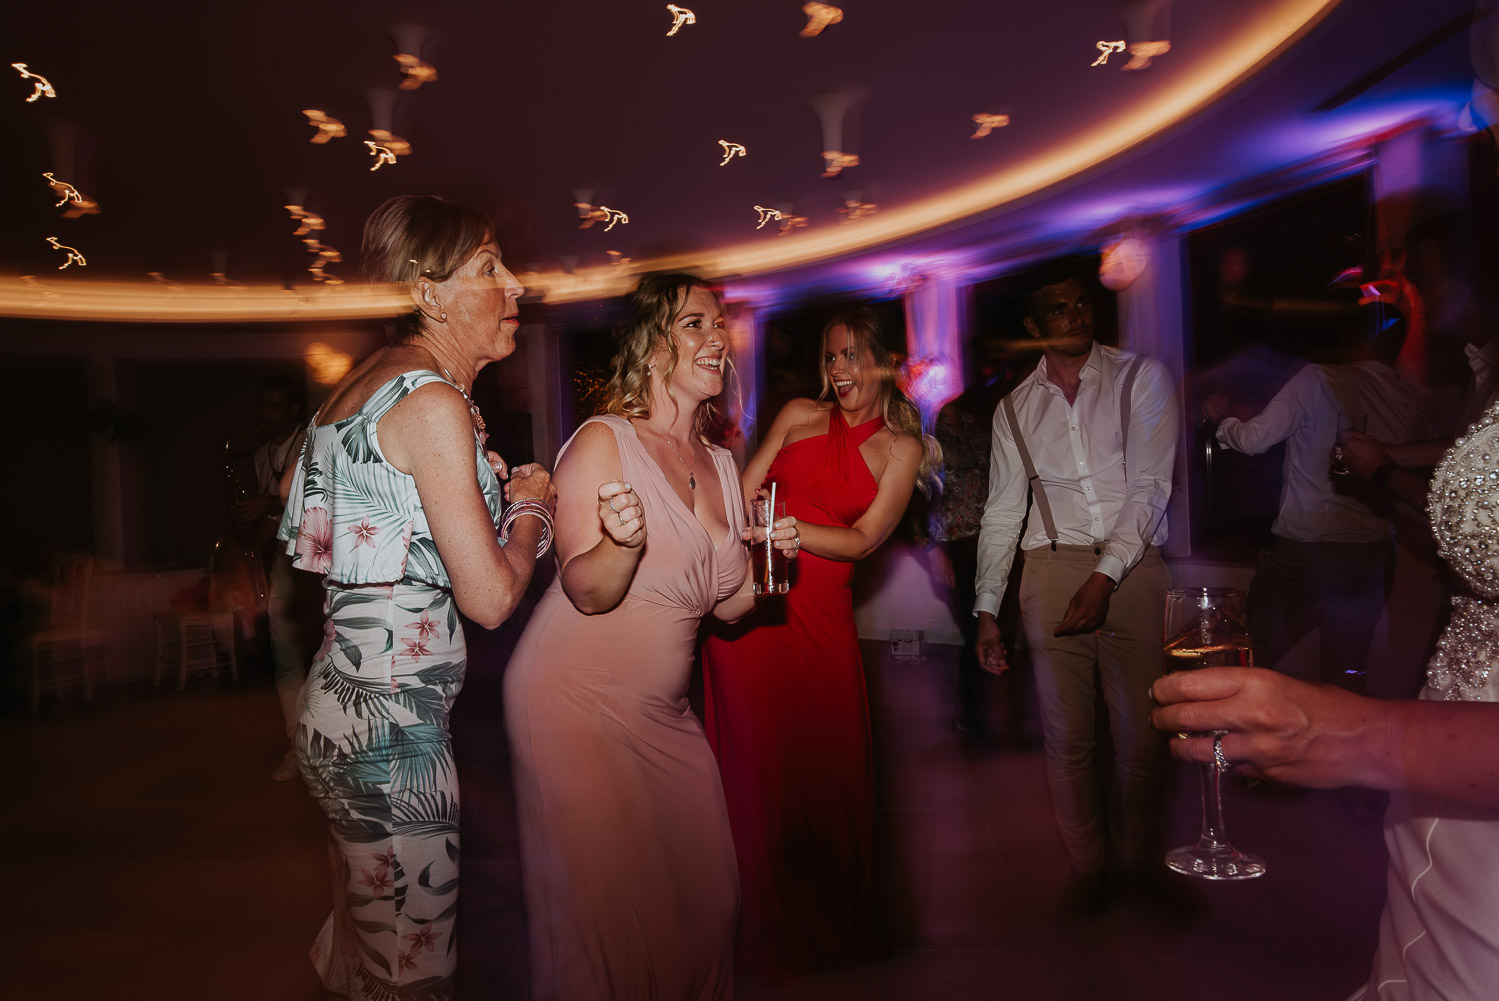 Wedding photographer Santorini: wedding guests singing and moving on dance floor by Ben and Vesna.